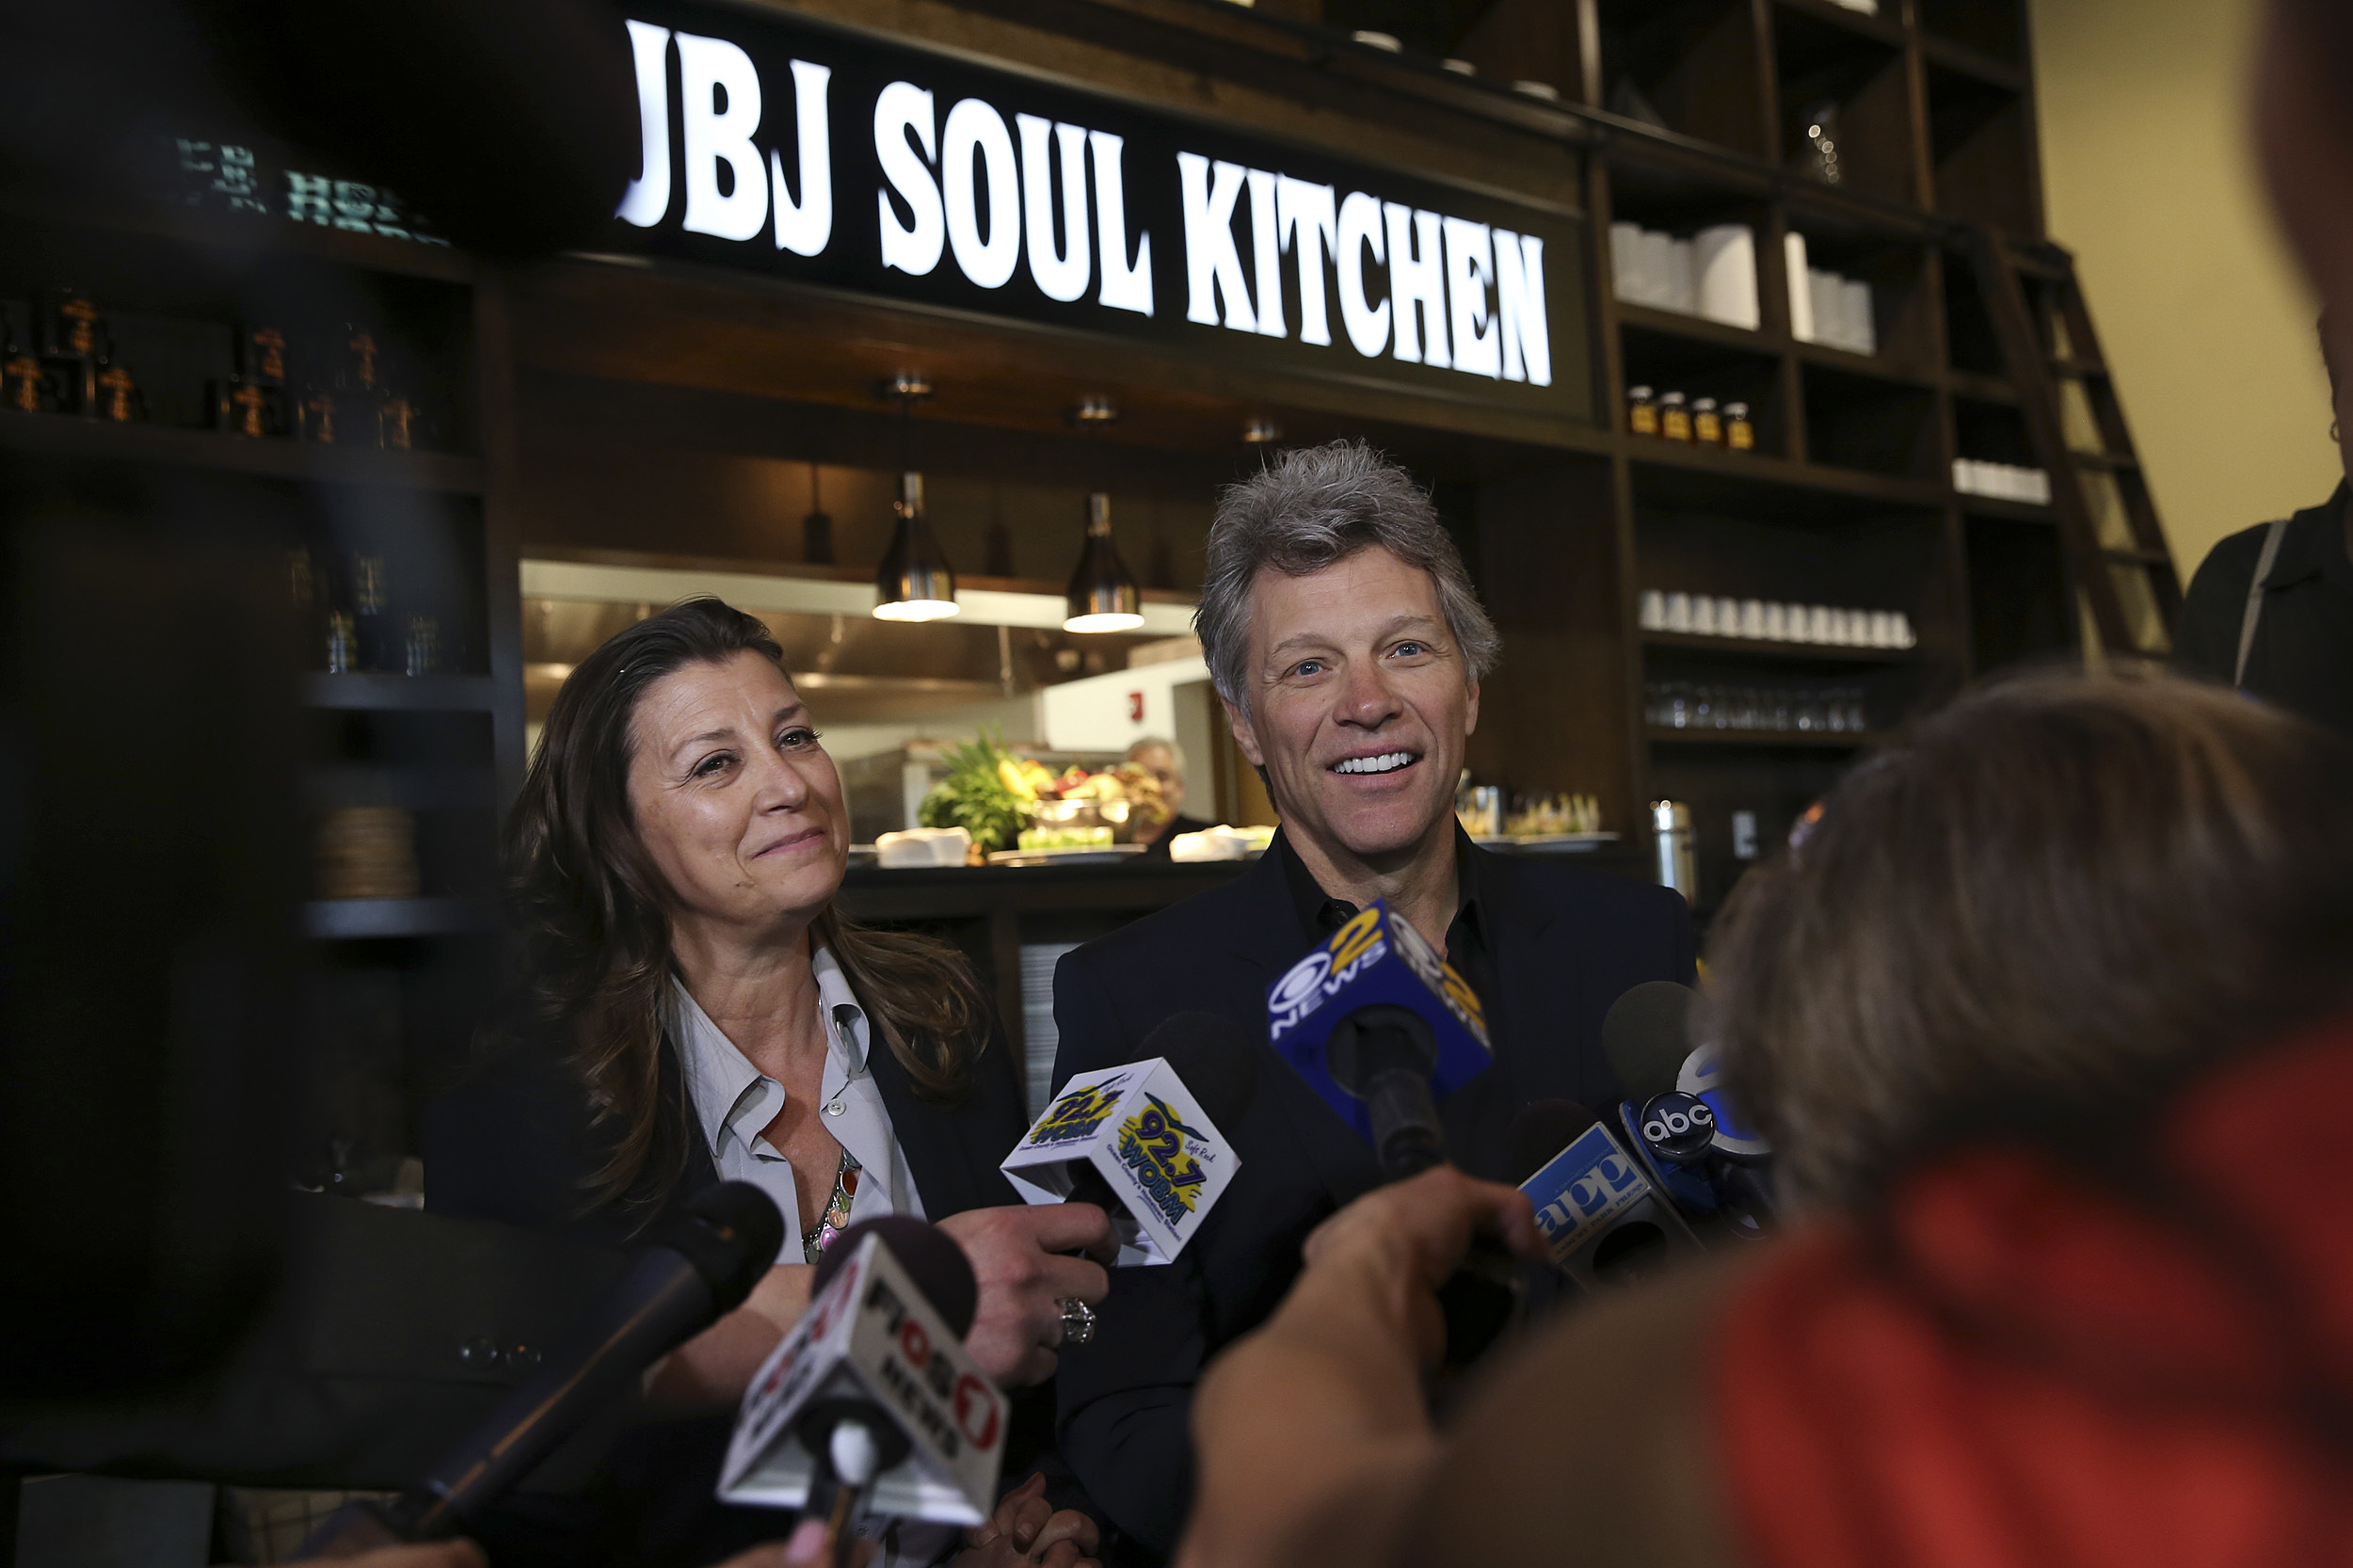 Napier focus Speciaal Bon Jovi is opening a new Soul Kitchen location